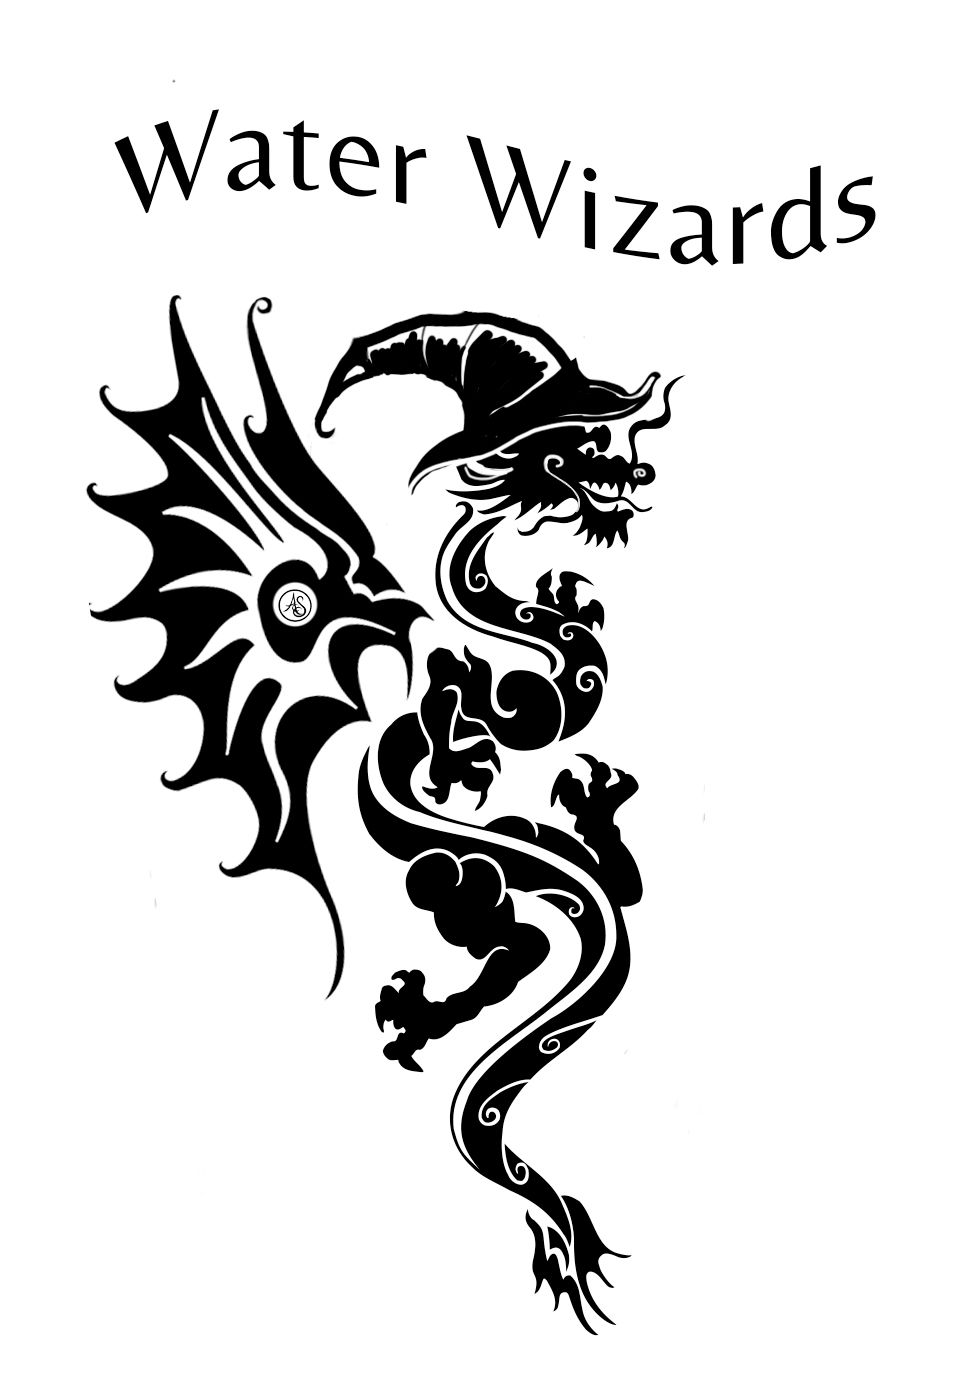 Team logo created by Amanta Scott for the Rusty Dragons.